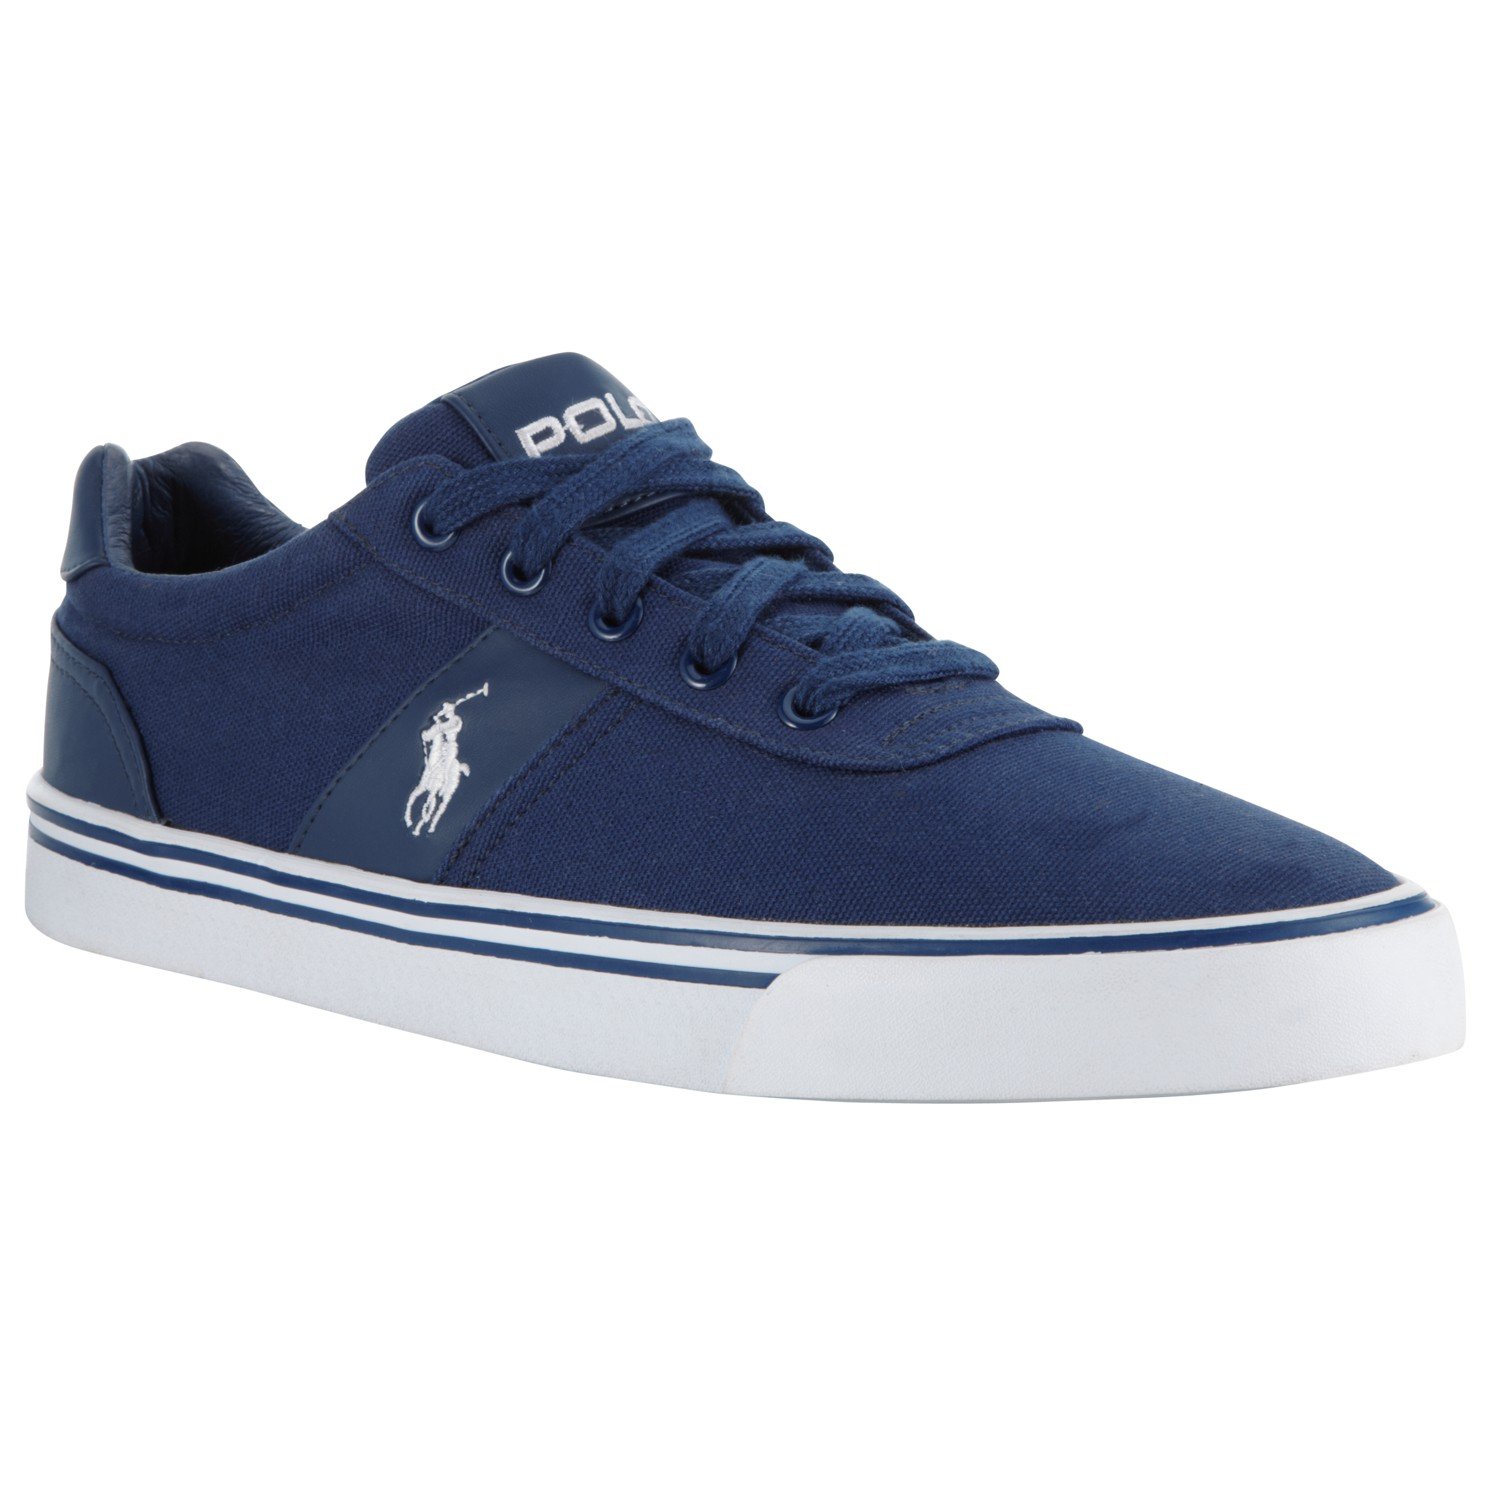 Polo Ralph Lauren Hanford Canvas Trainers in Blue for Men (navy) | Lyst